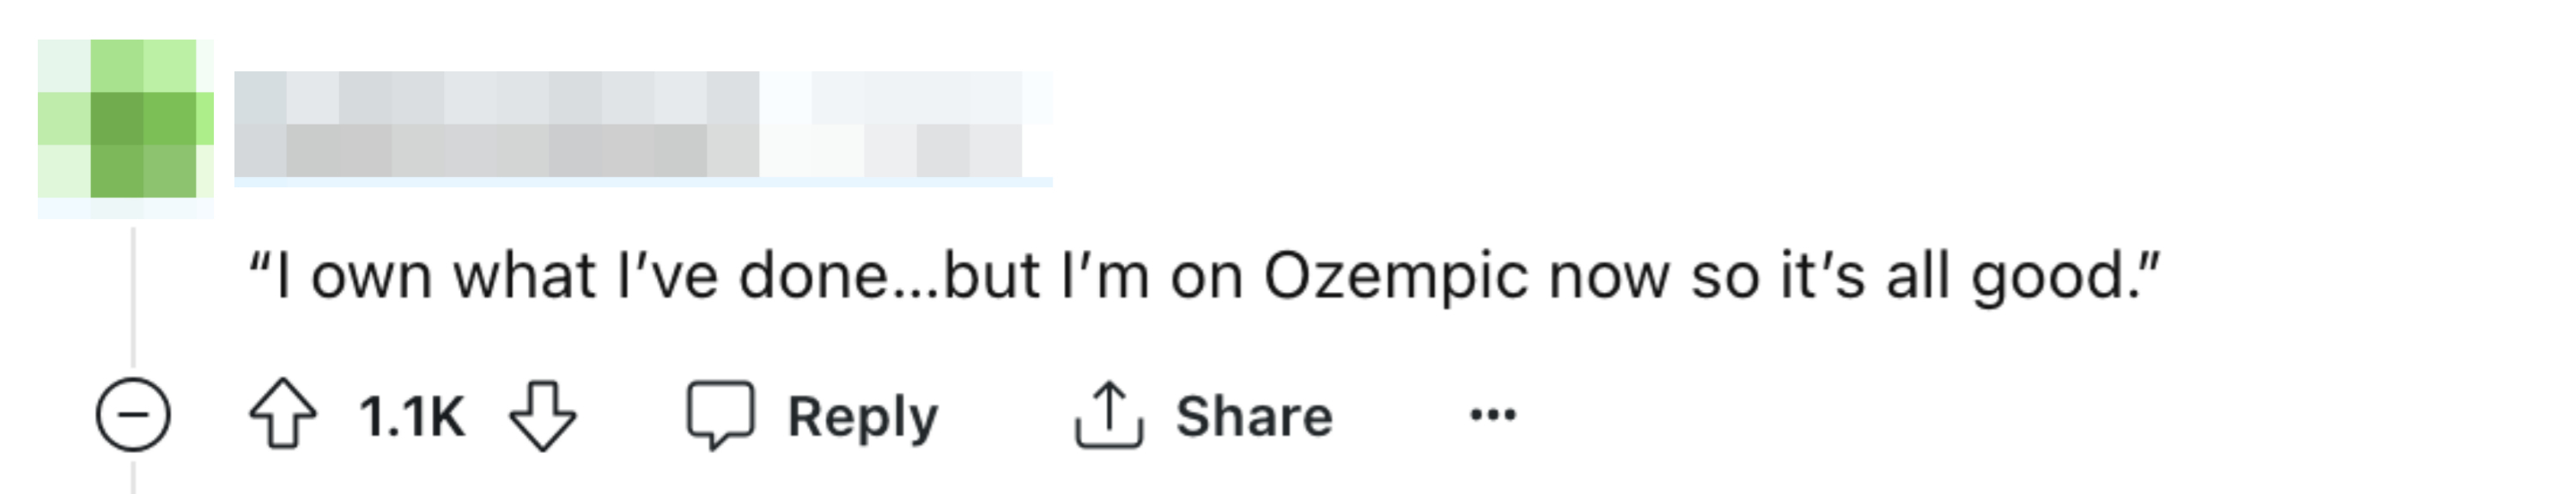 User comment on a platform, expressing ownership of past actions but noting improvement due to a medication called Ozempic